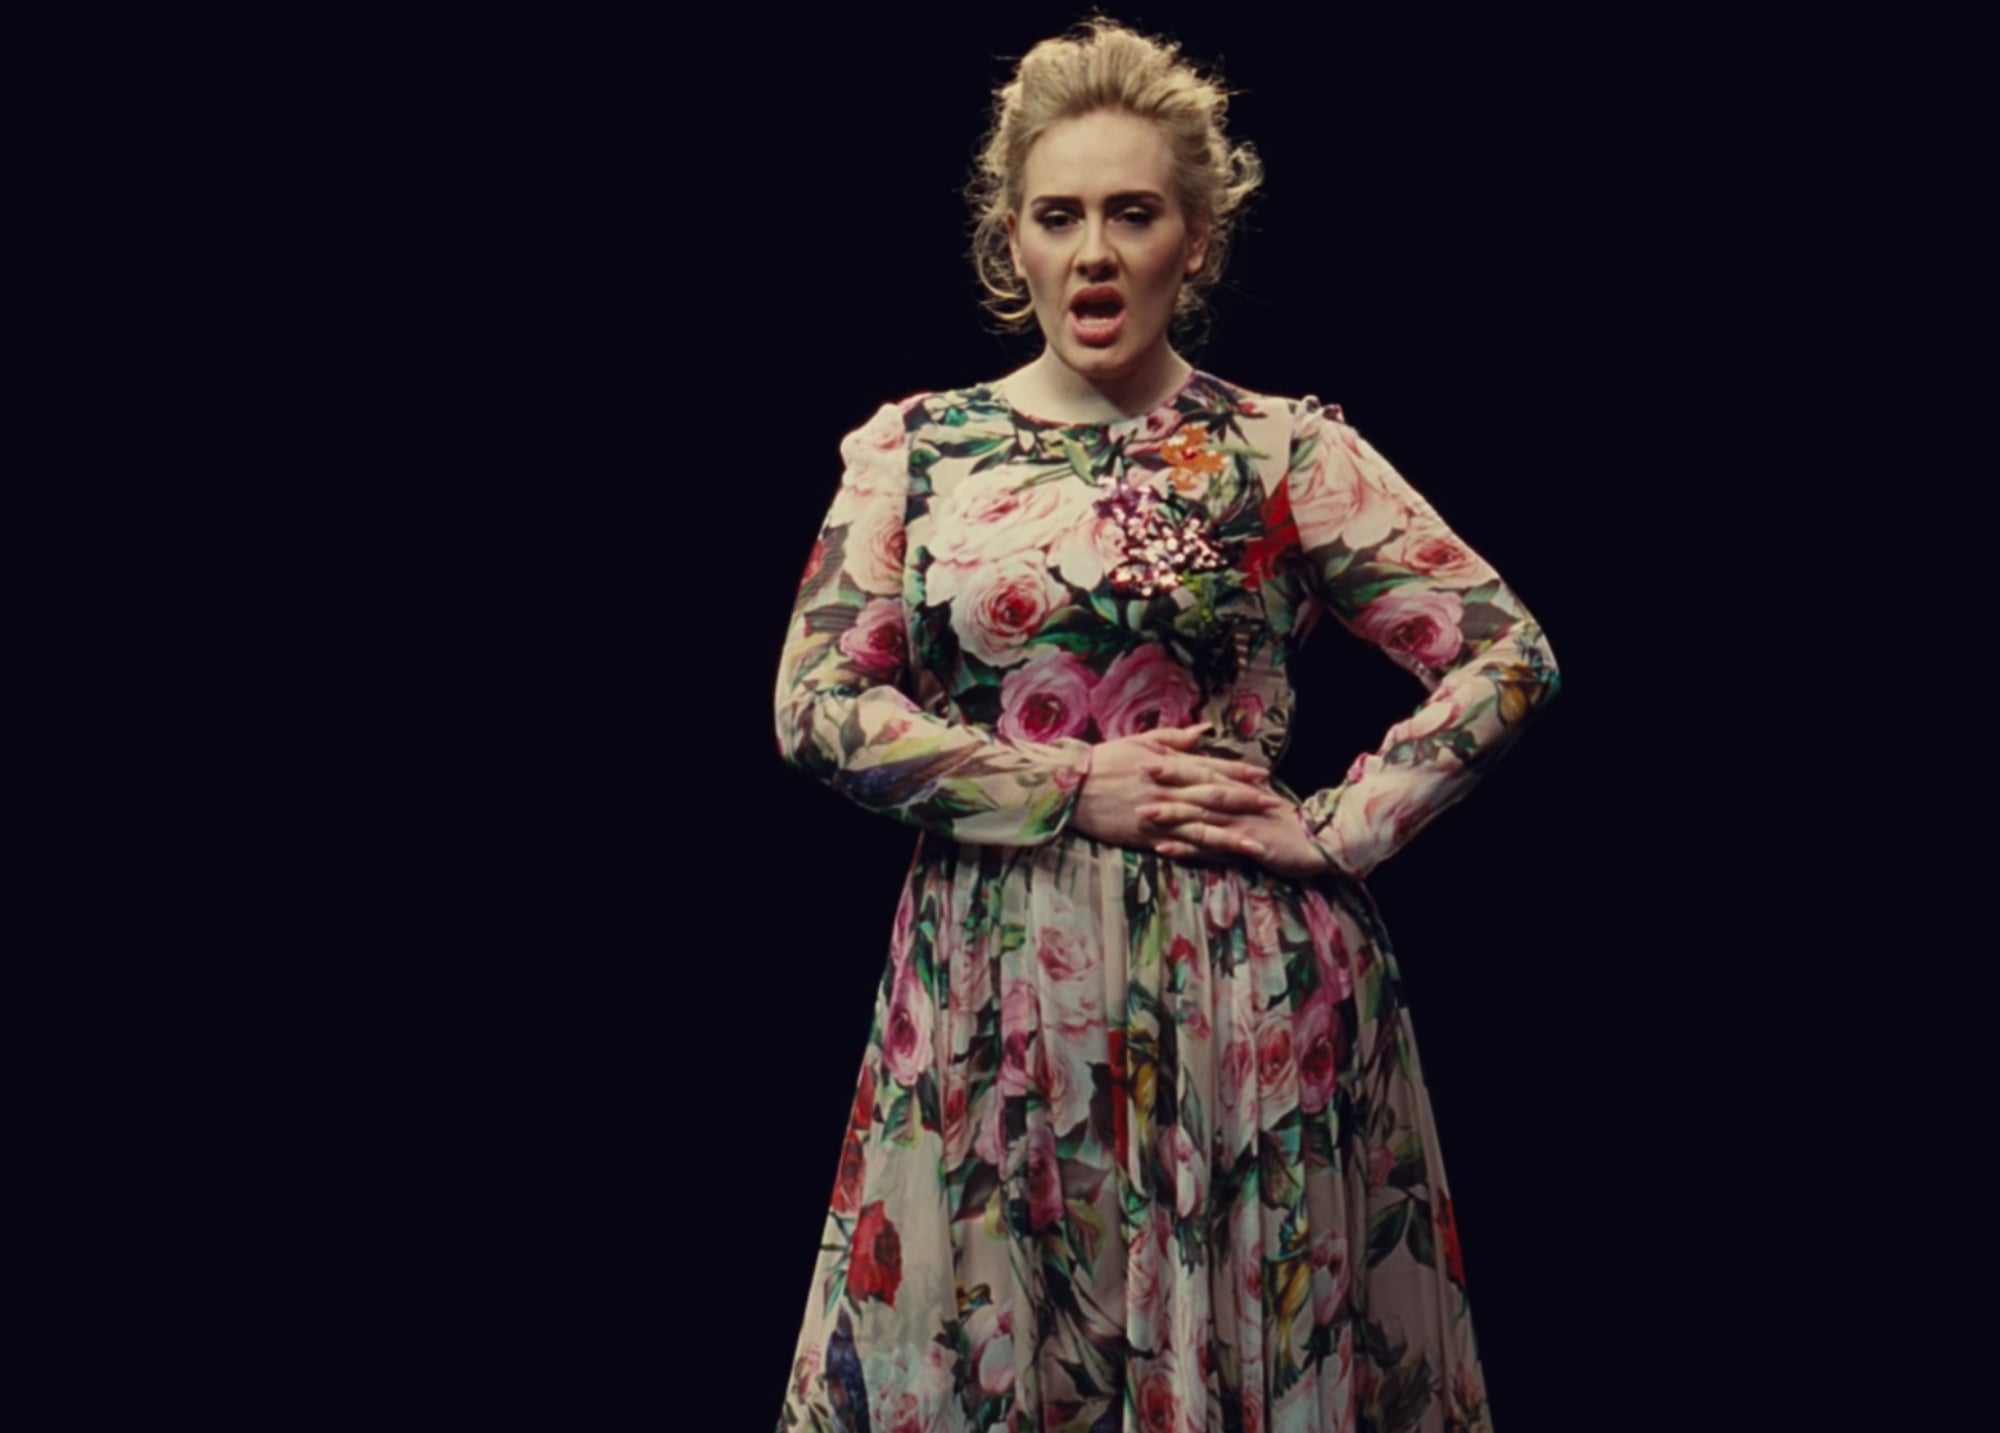 Adele's Dolce & Gabbana Gown in 